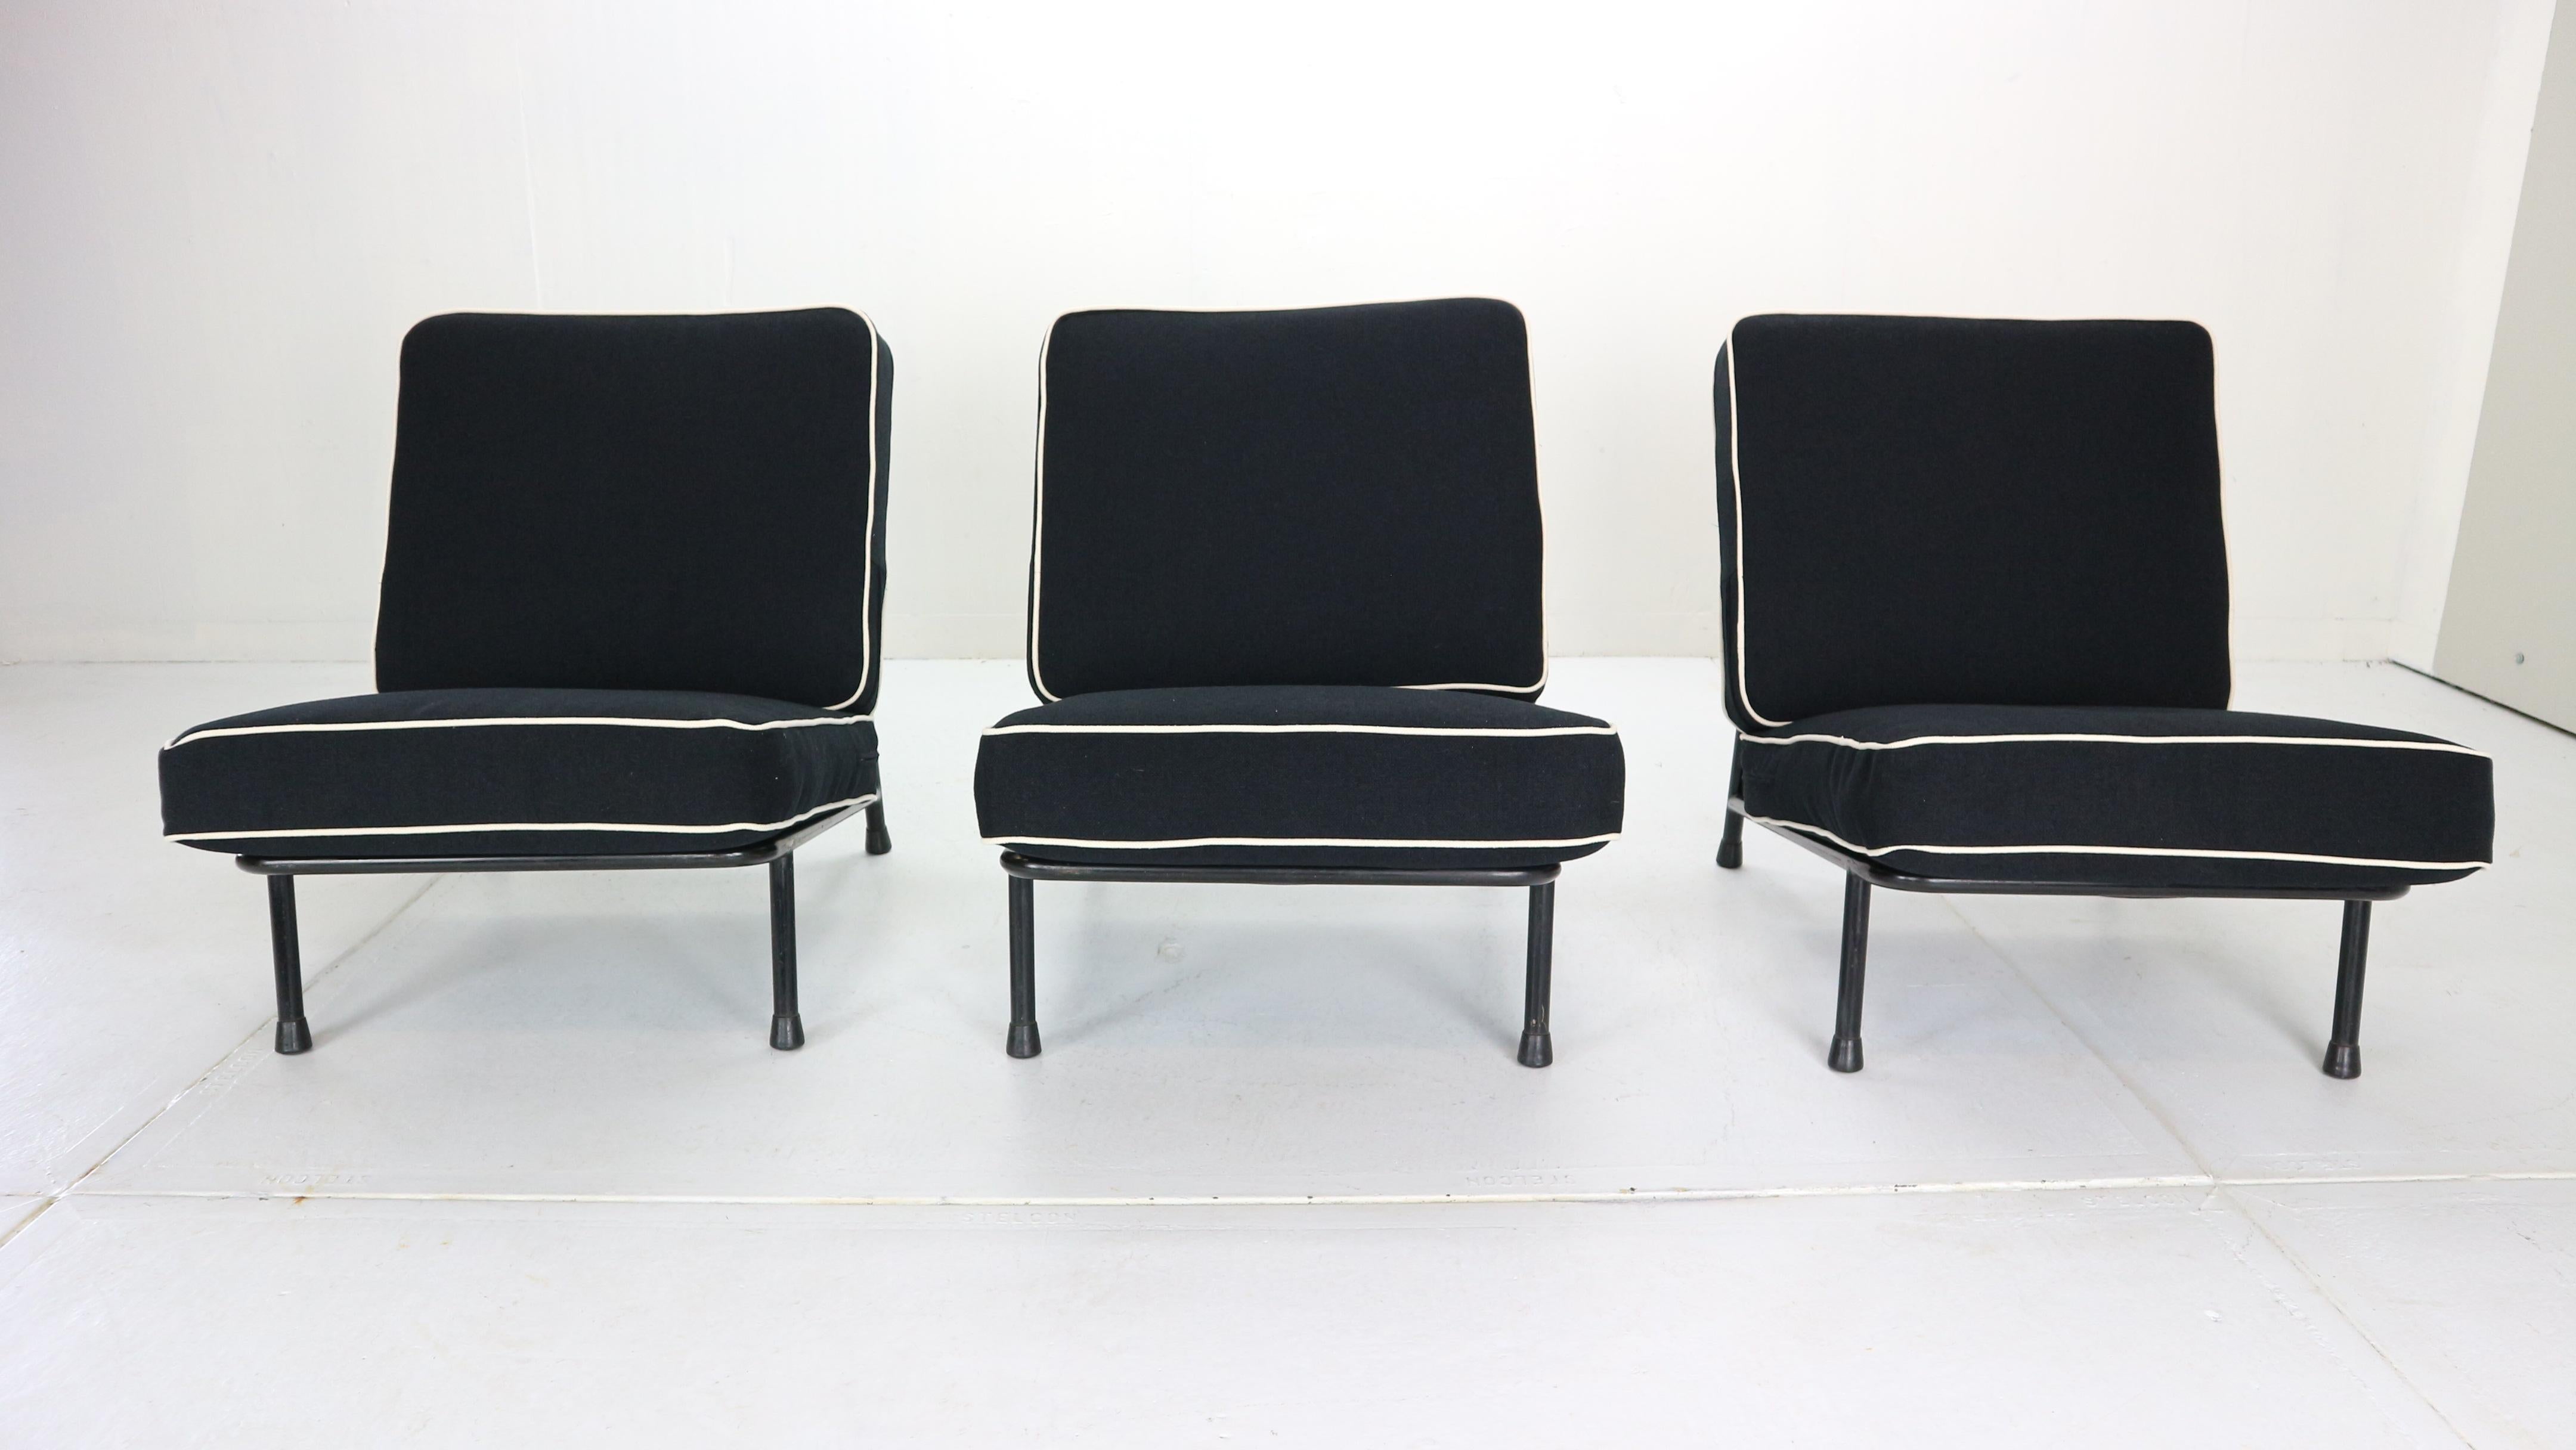 A set of 3 easy lounge chairs designed by Alf Svensson in 1950s for DUX manufacture fabric. These chairs were sold by Artifort in the Netherlands. This is why they are sometimes credited to Artifort.

Model no: 013 and is in contrast to many other